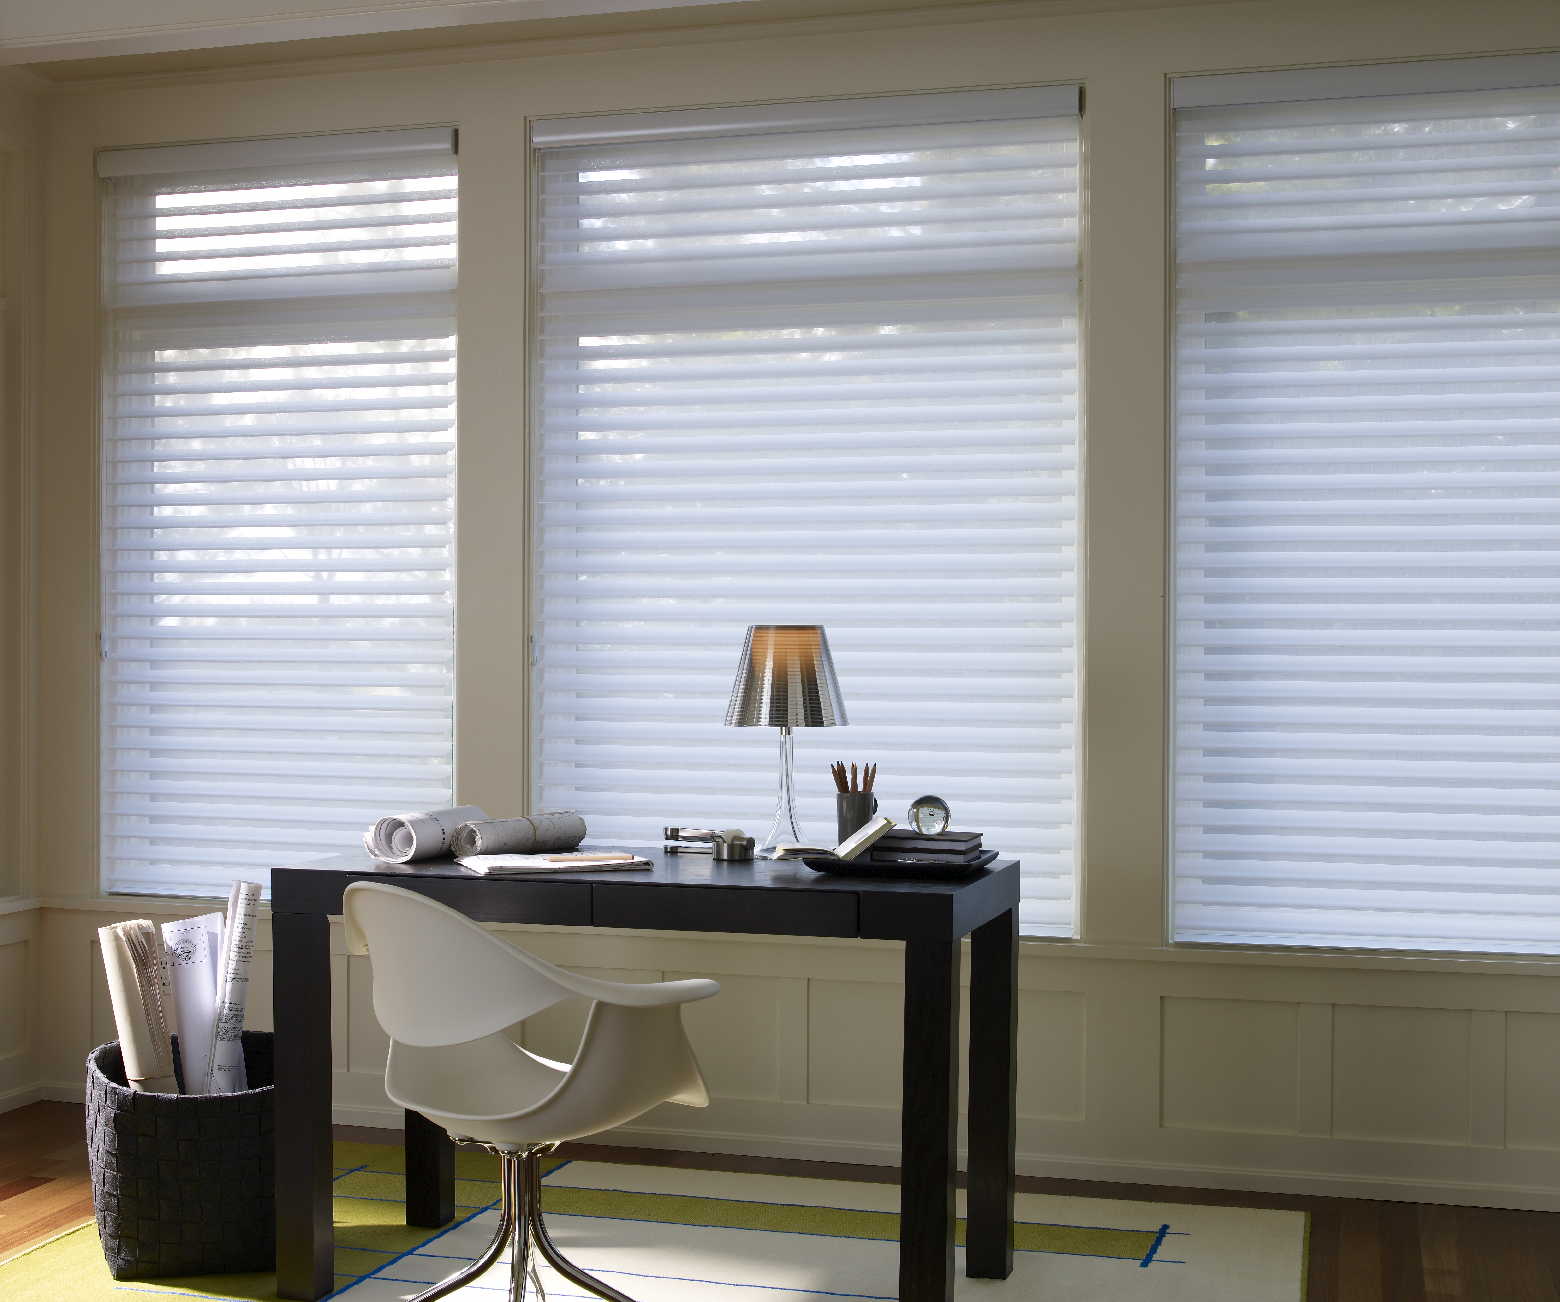 a desk and chair in a room with white blinds window treatment solutions Love is Blinds